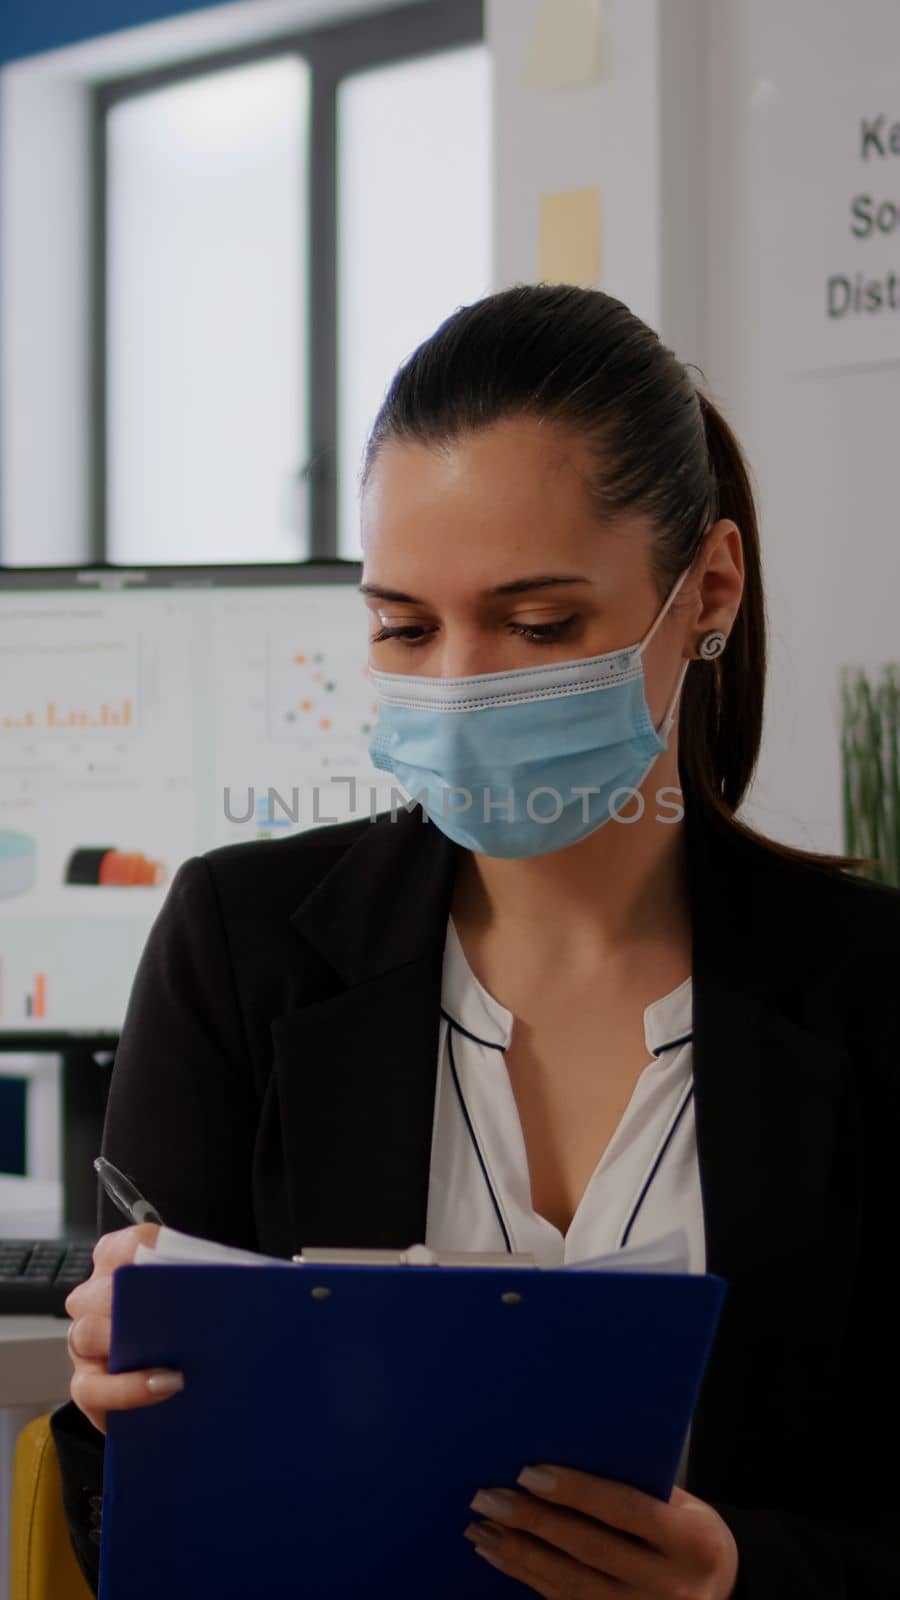 Pov of business woman with medical face mask working at communication project by DCStudio